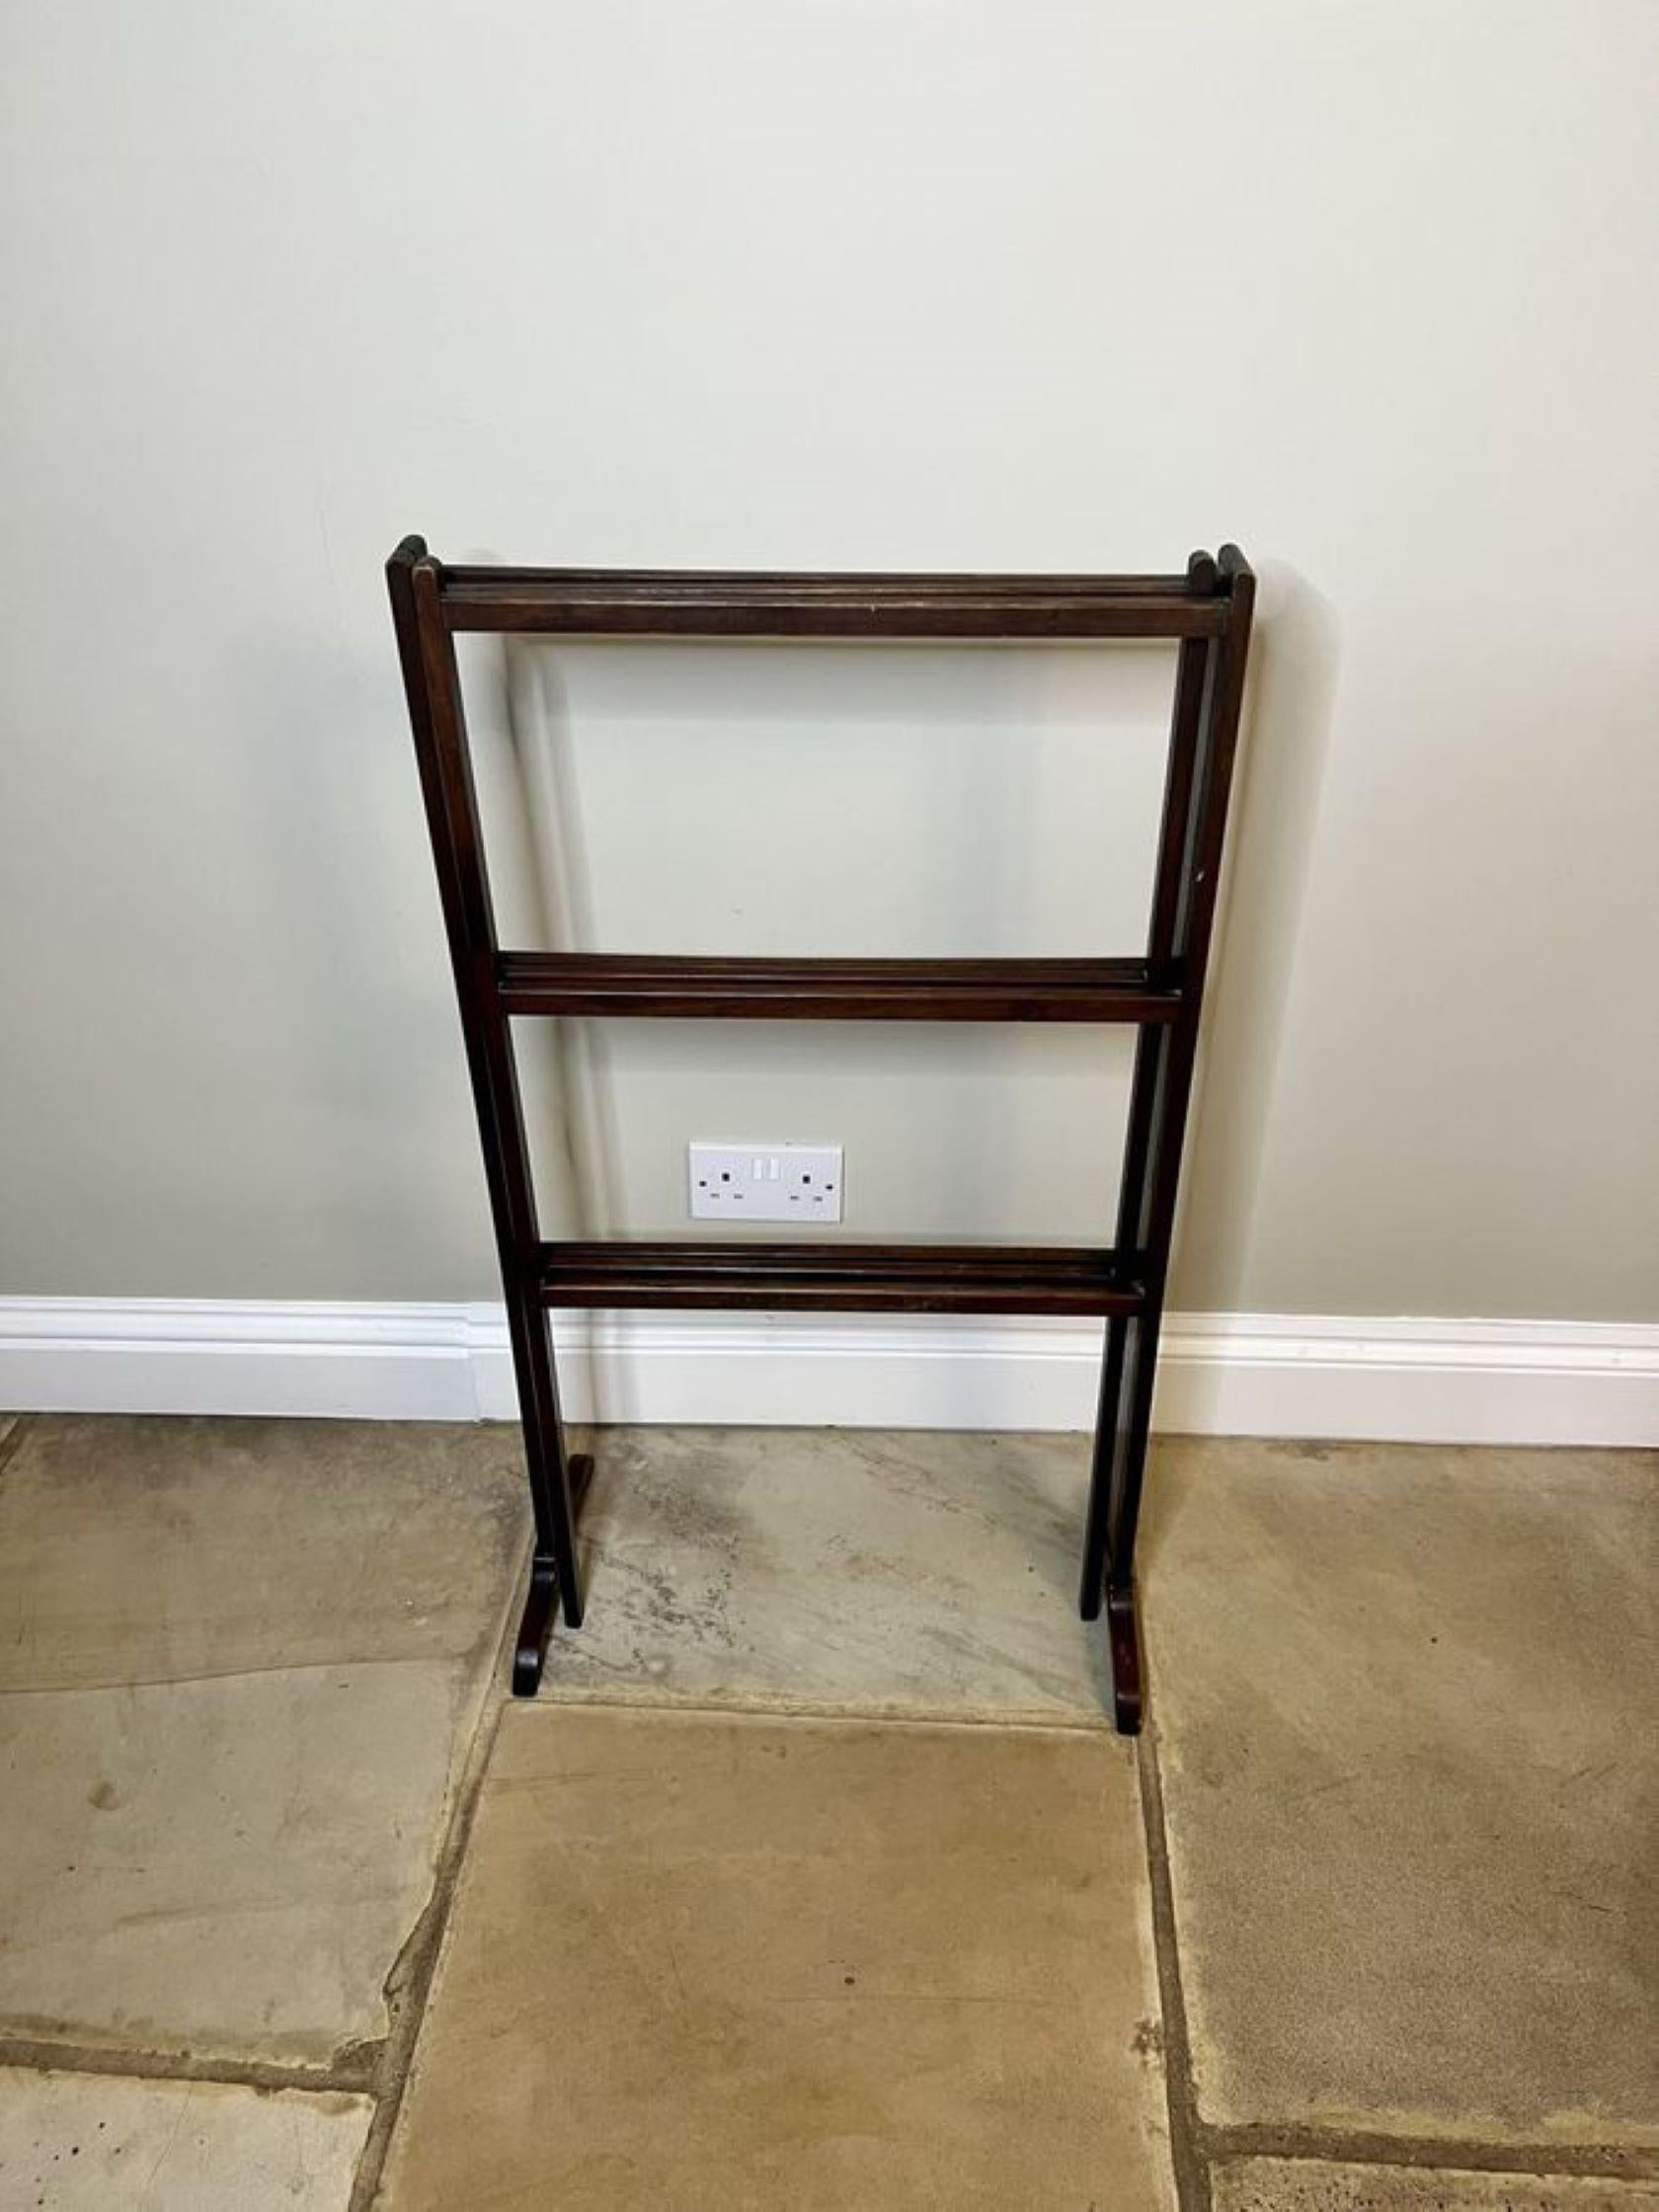 Antique Edwardian mahogany folding clothes airer having a double gate folding action with nine mahogany splats, standing on shaped feet.

Width open 155cm

D. 1900